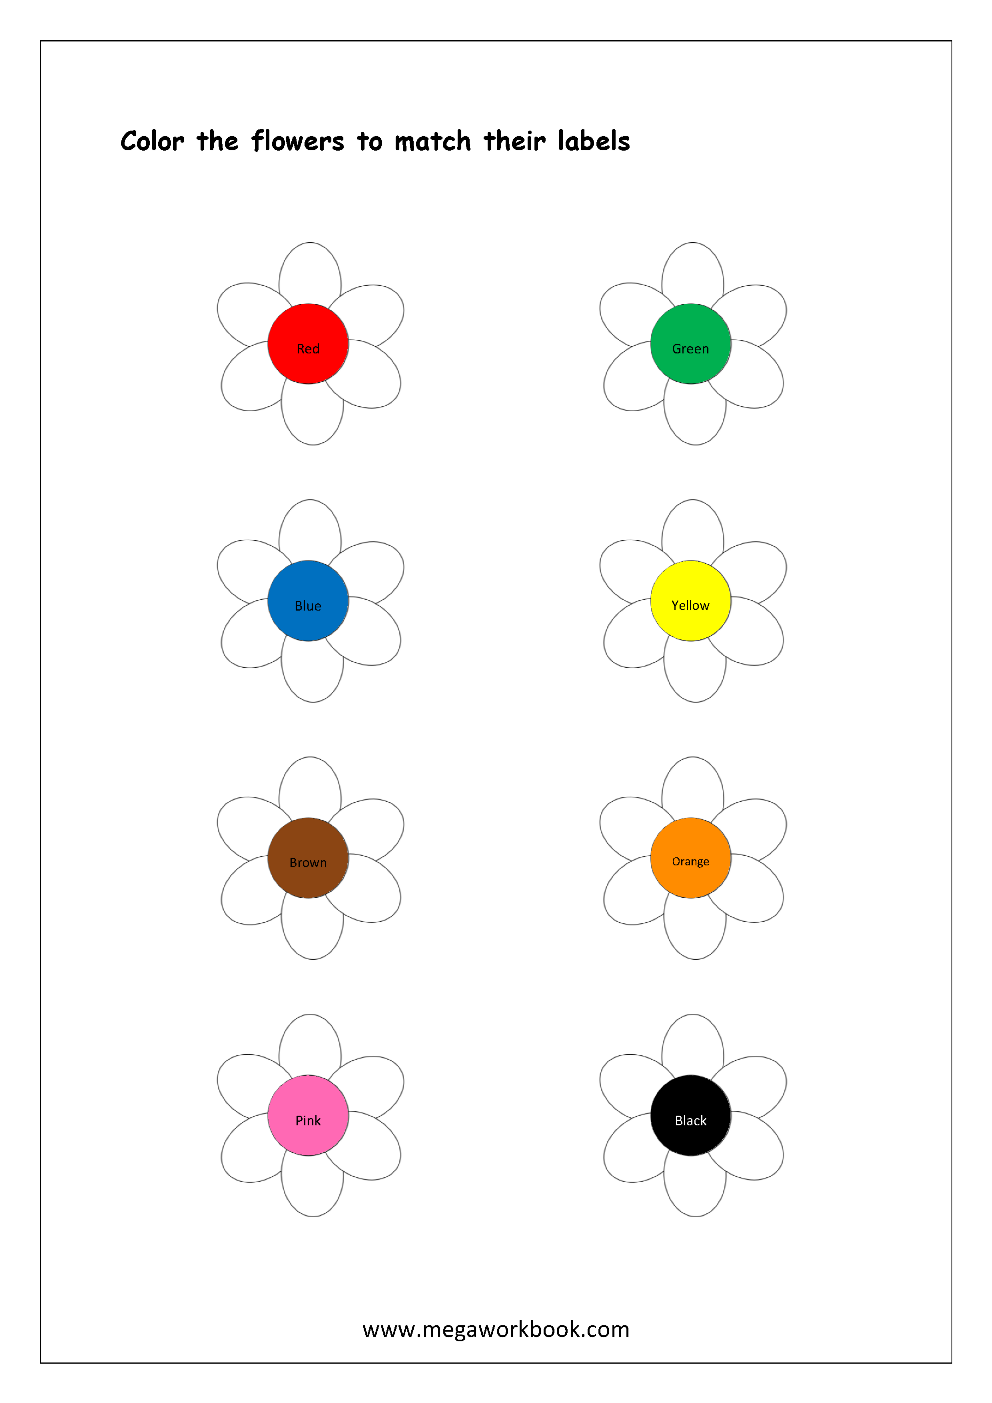 Free Printable Color Recognition Worksheets Color By Matching Hint Color MegaWorkbook - Color Recognition Worksheets Free Printable